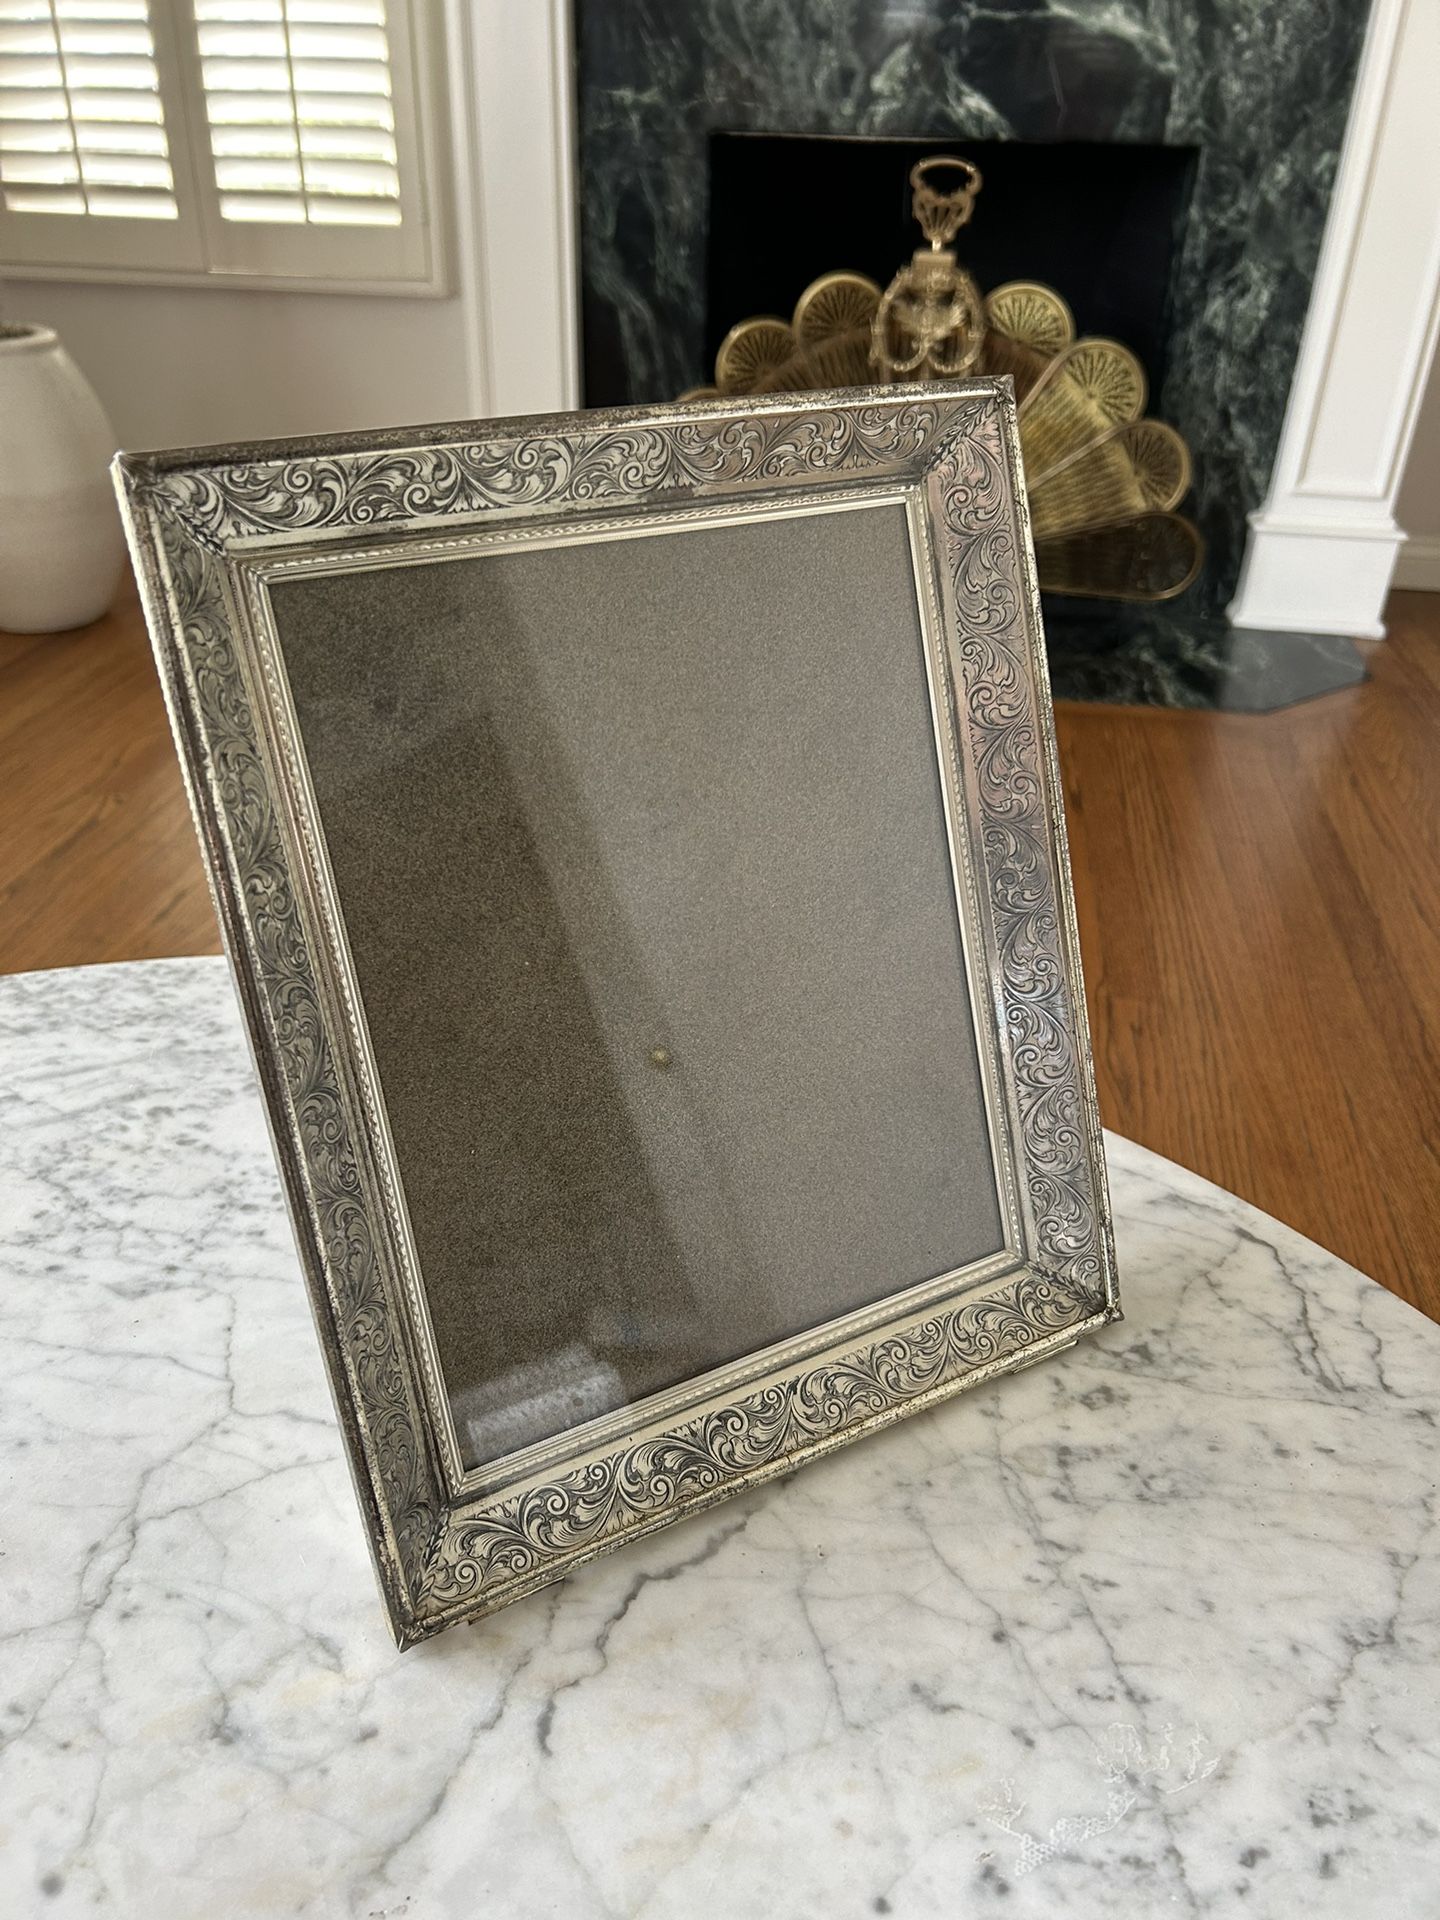 Antique Very Heavy Silver Table Wall Hanging Frame Picture Vintage Rare Collectible Art Holder Glass Finish Antique Filigree Gorgeous Ornate For Artwo